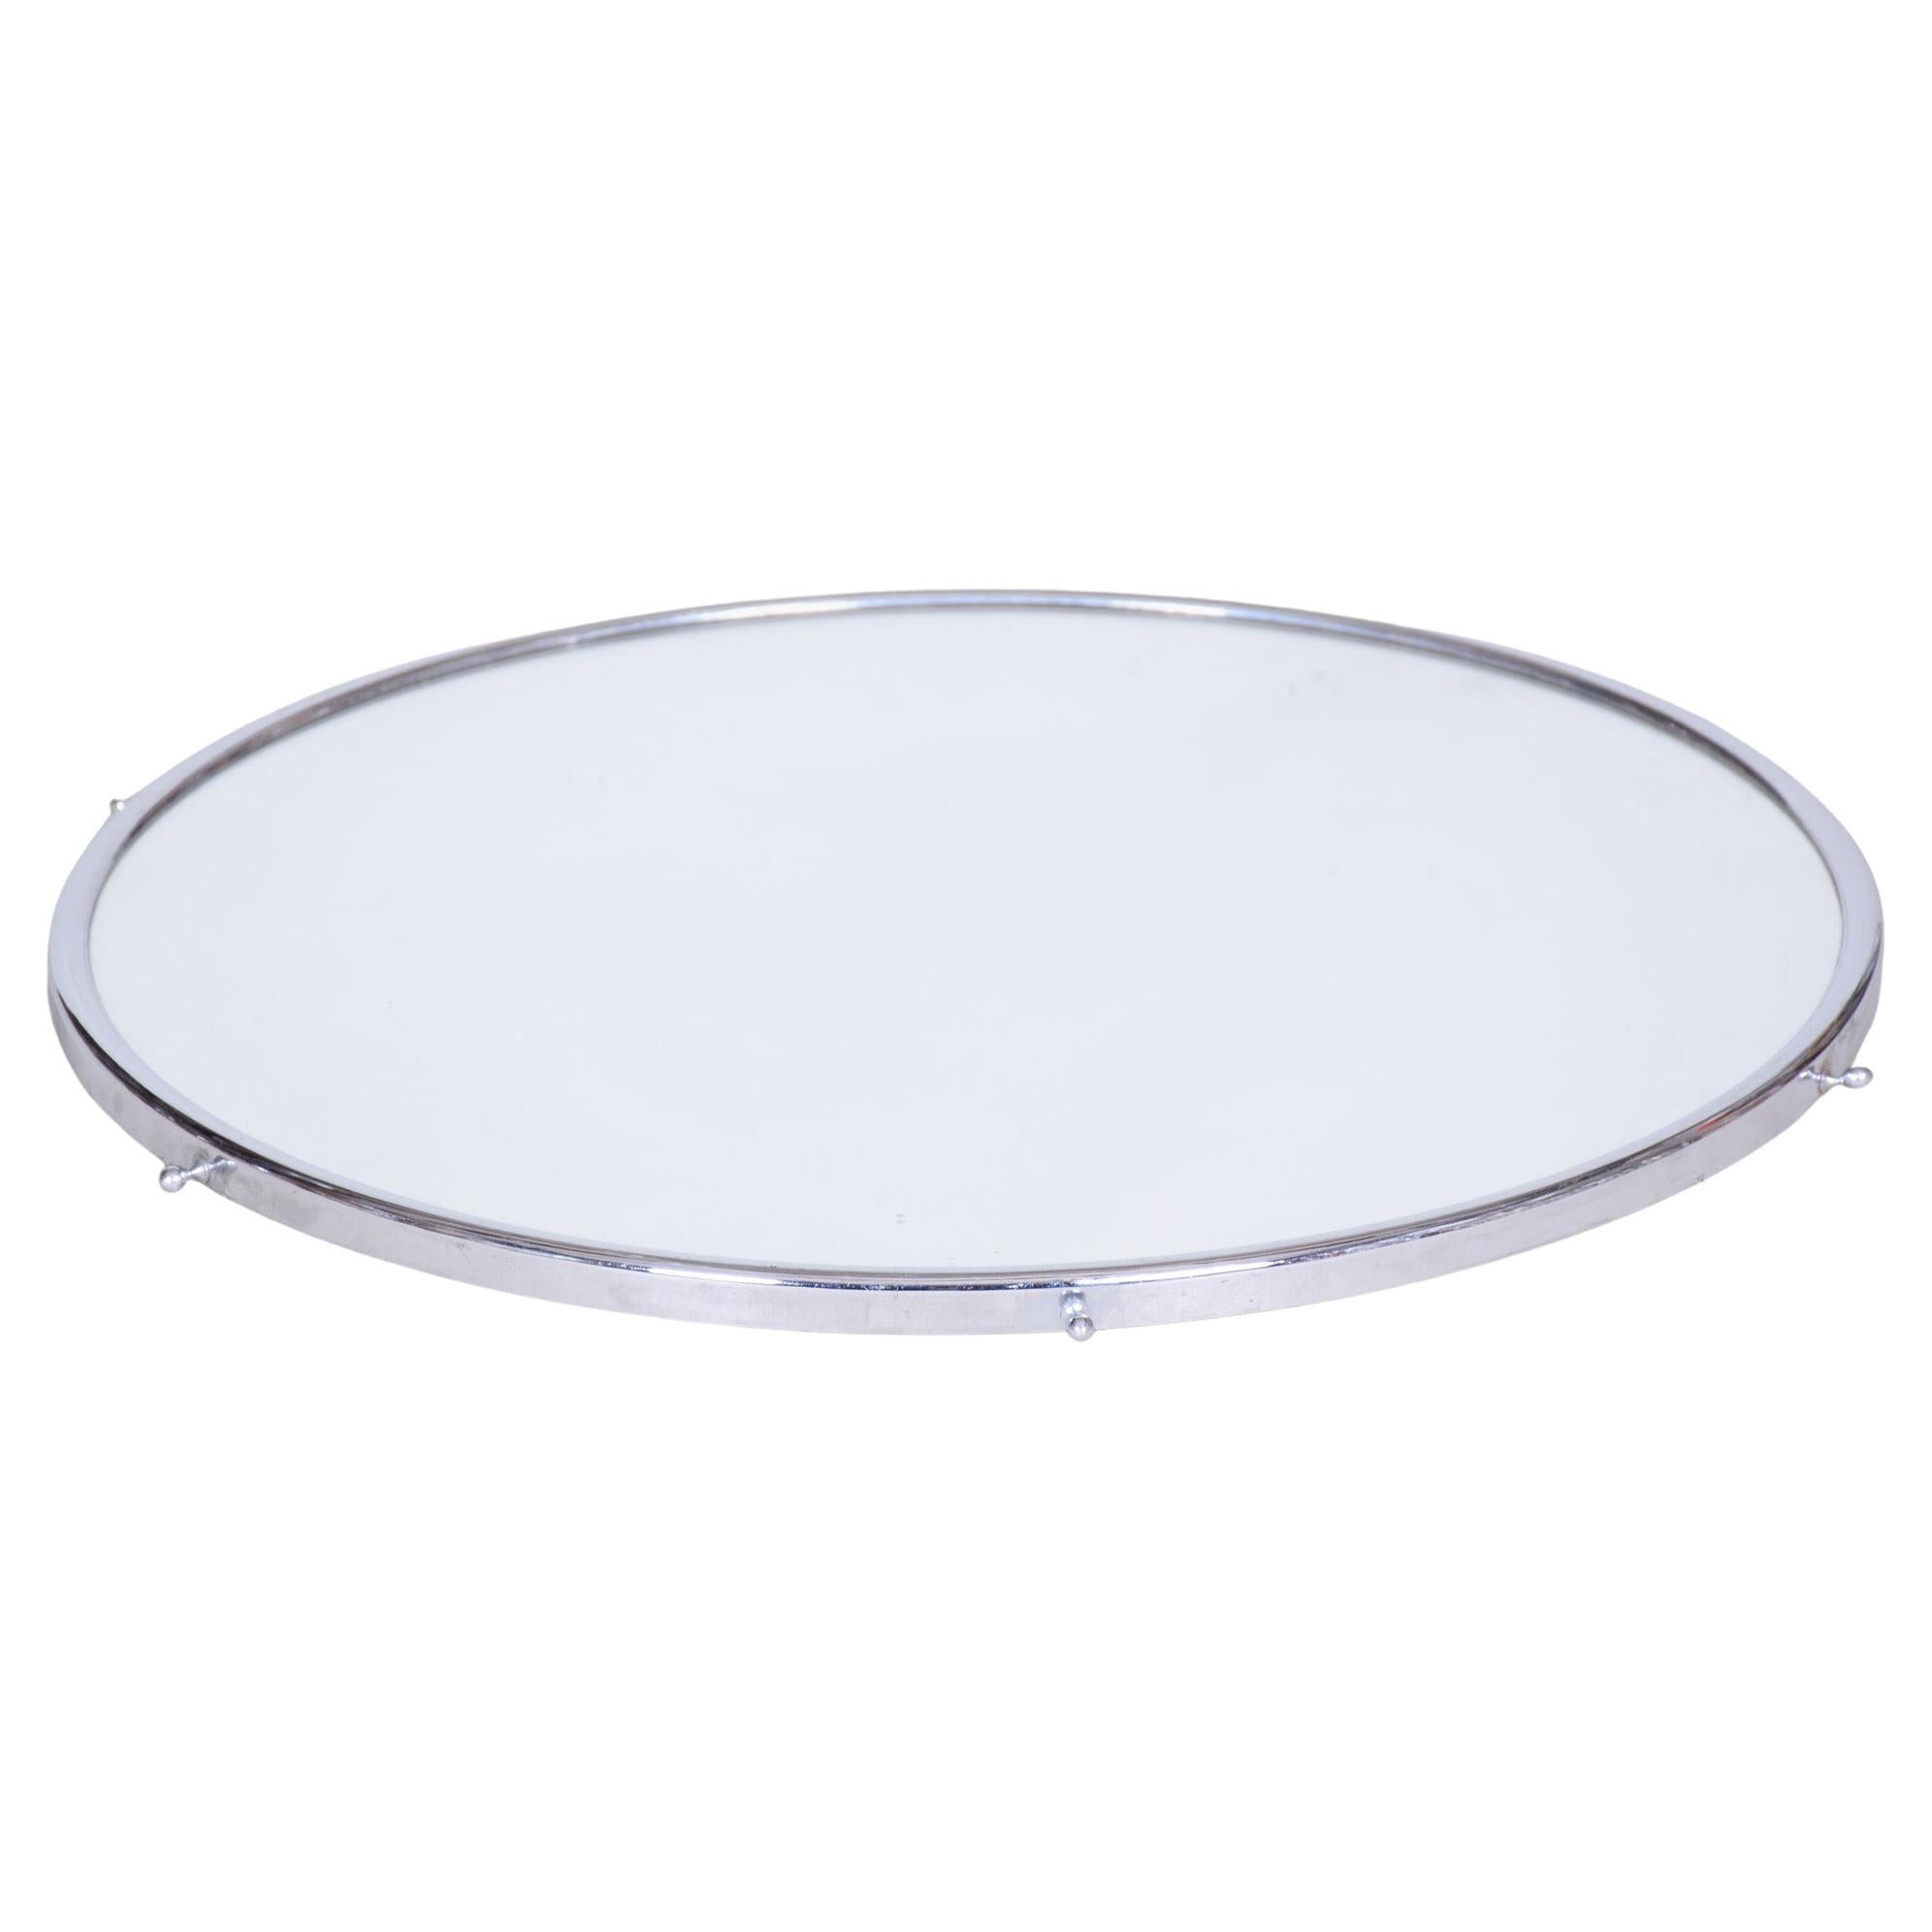 Rotating Mirror Tray in Original Condition, Made in Czechia 1930s For Sale